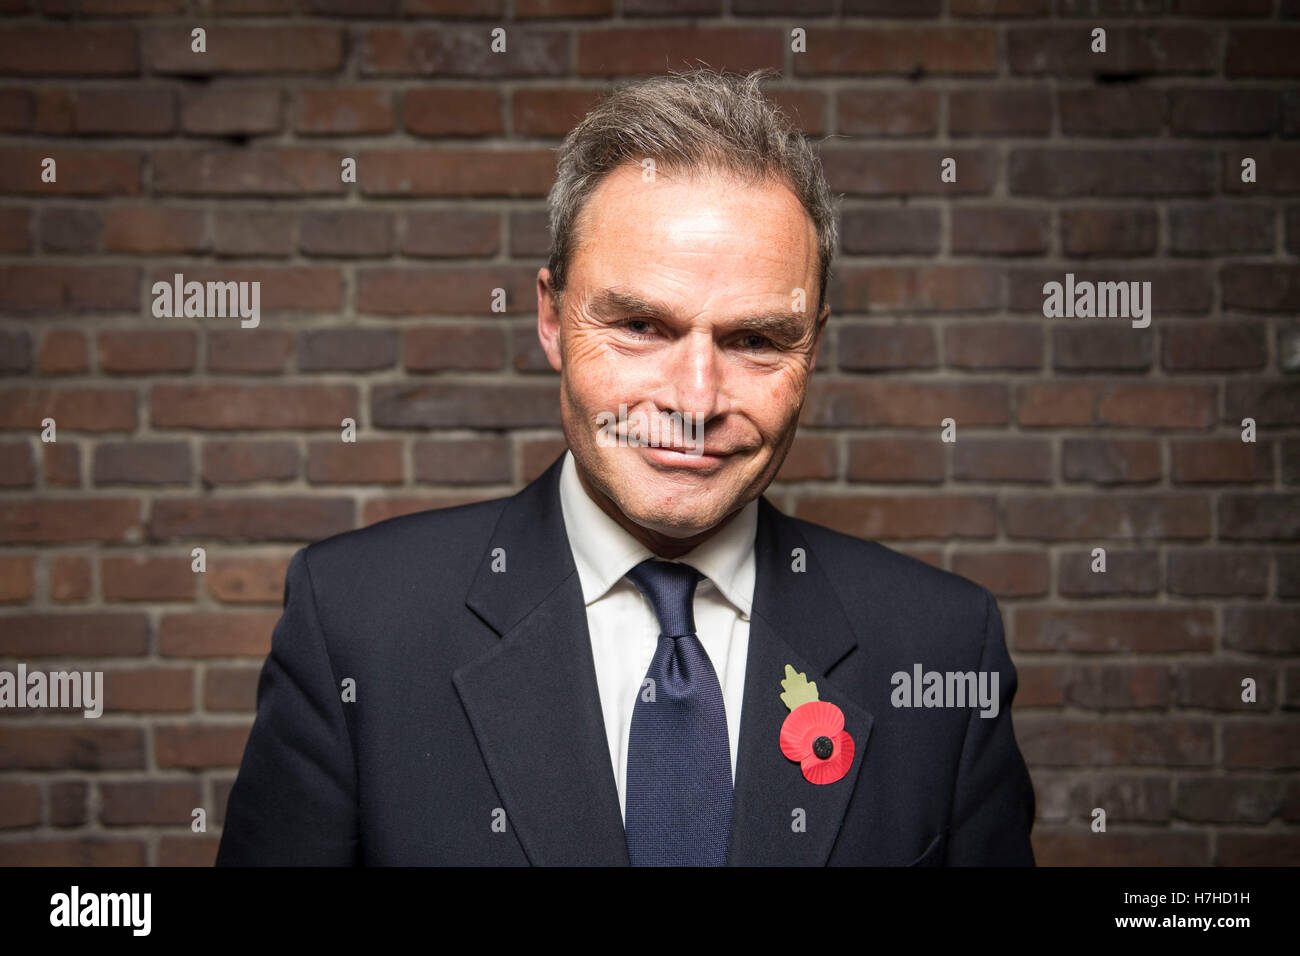 Peter Whittle AM UKIP Member of the London Assembly. Stock Photo